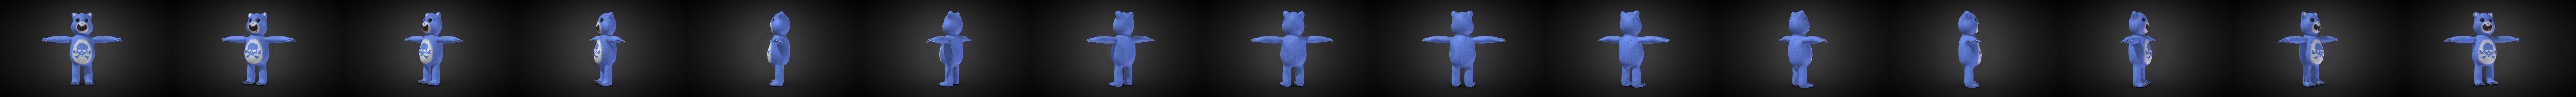 Bear From Masha And The Bear T-Pose 3D Model [Request]